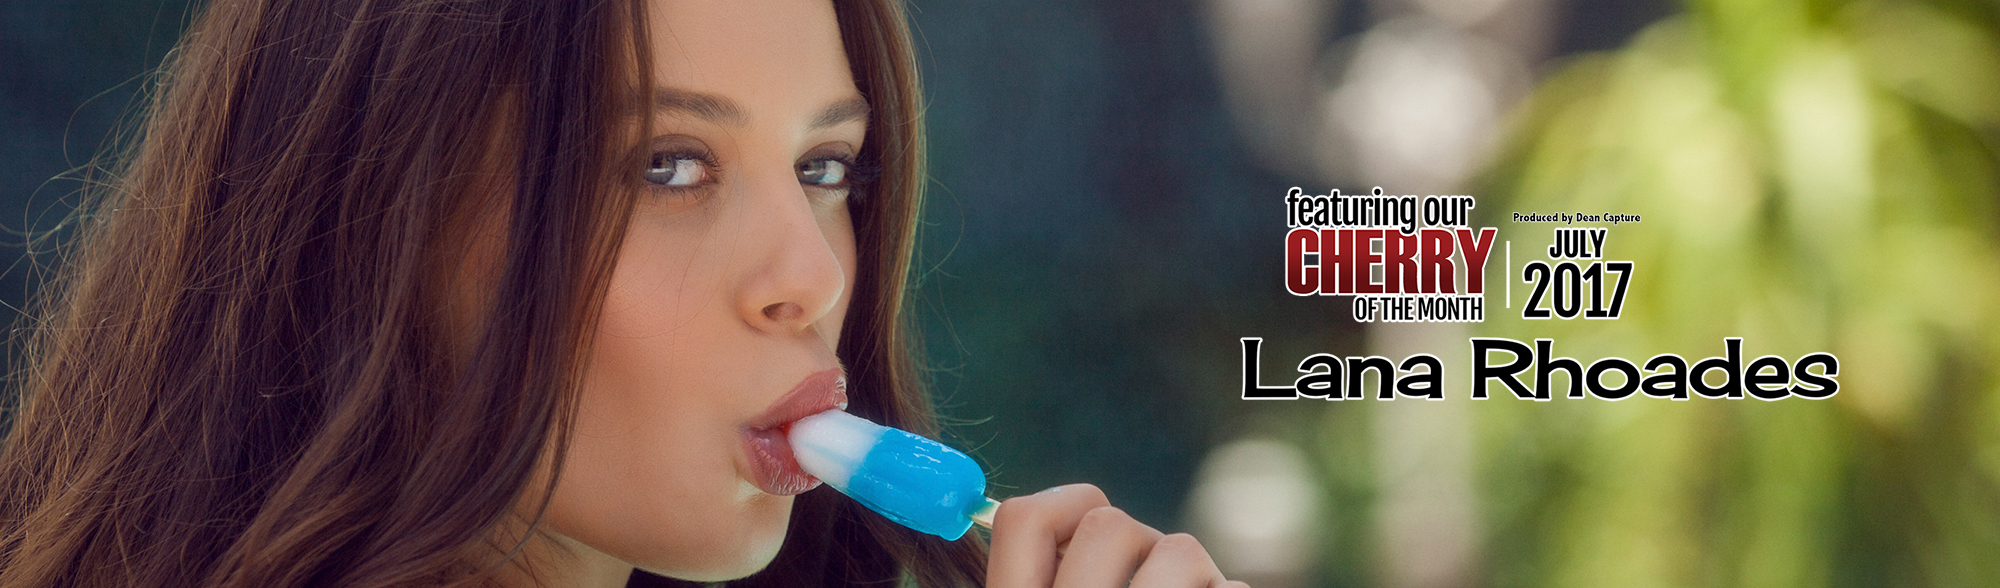 Cherry Of The Month: July 2017 – Lana Rhoades